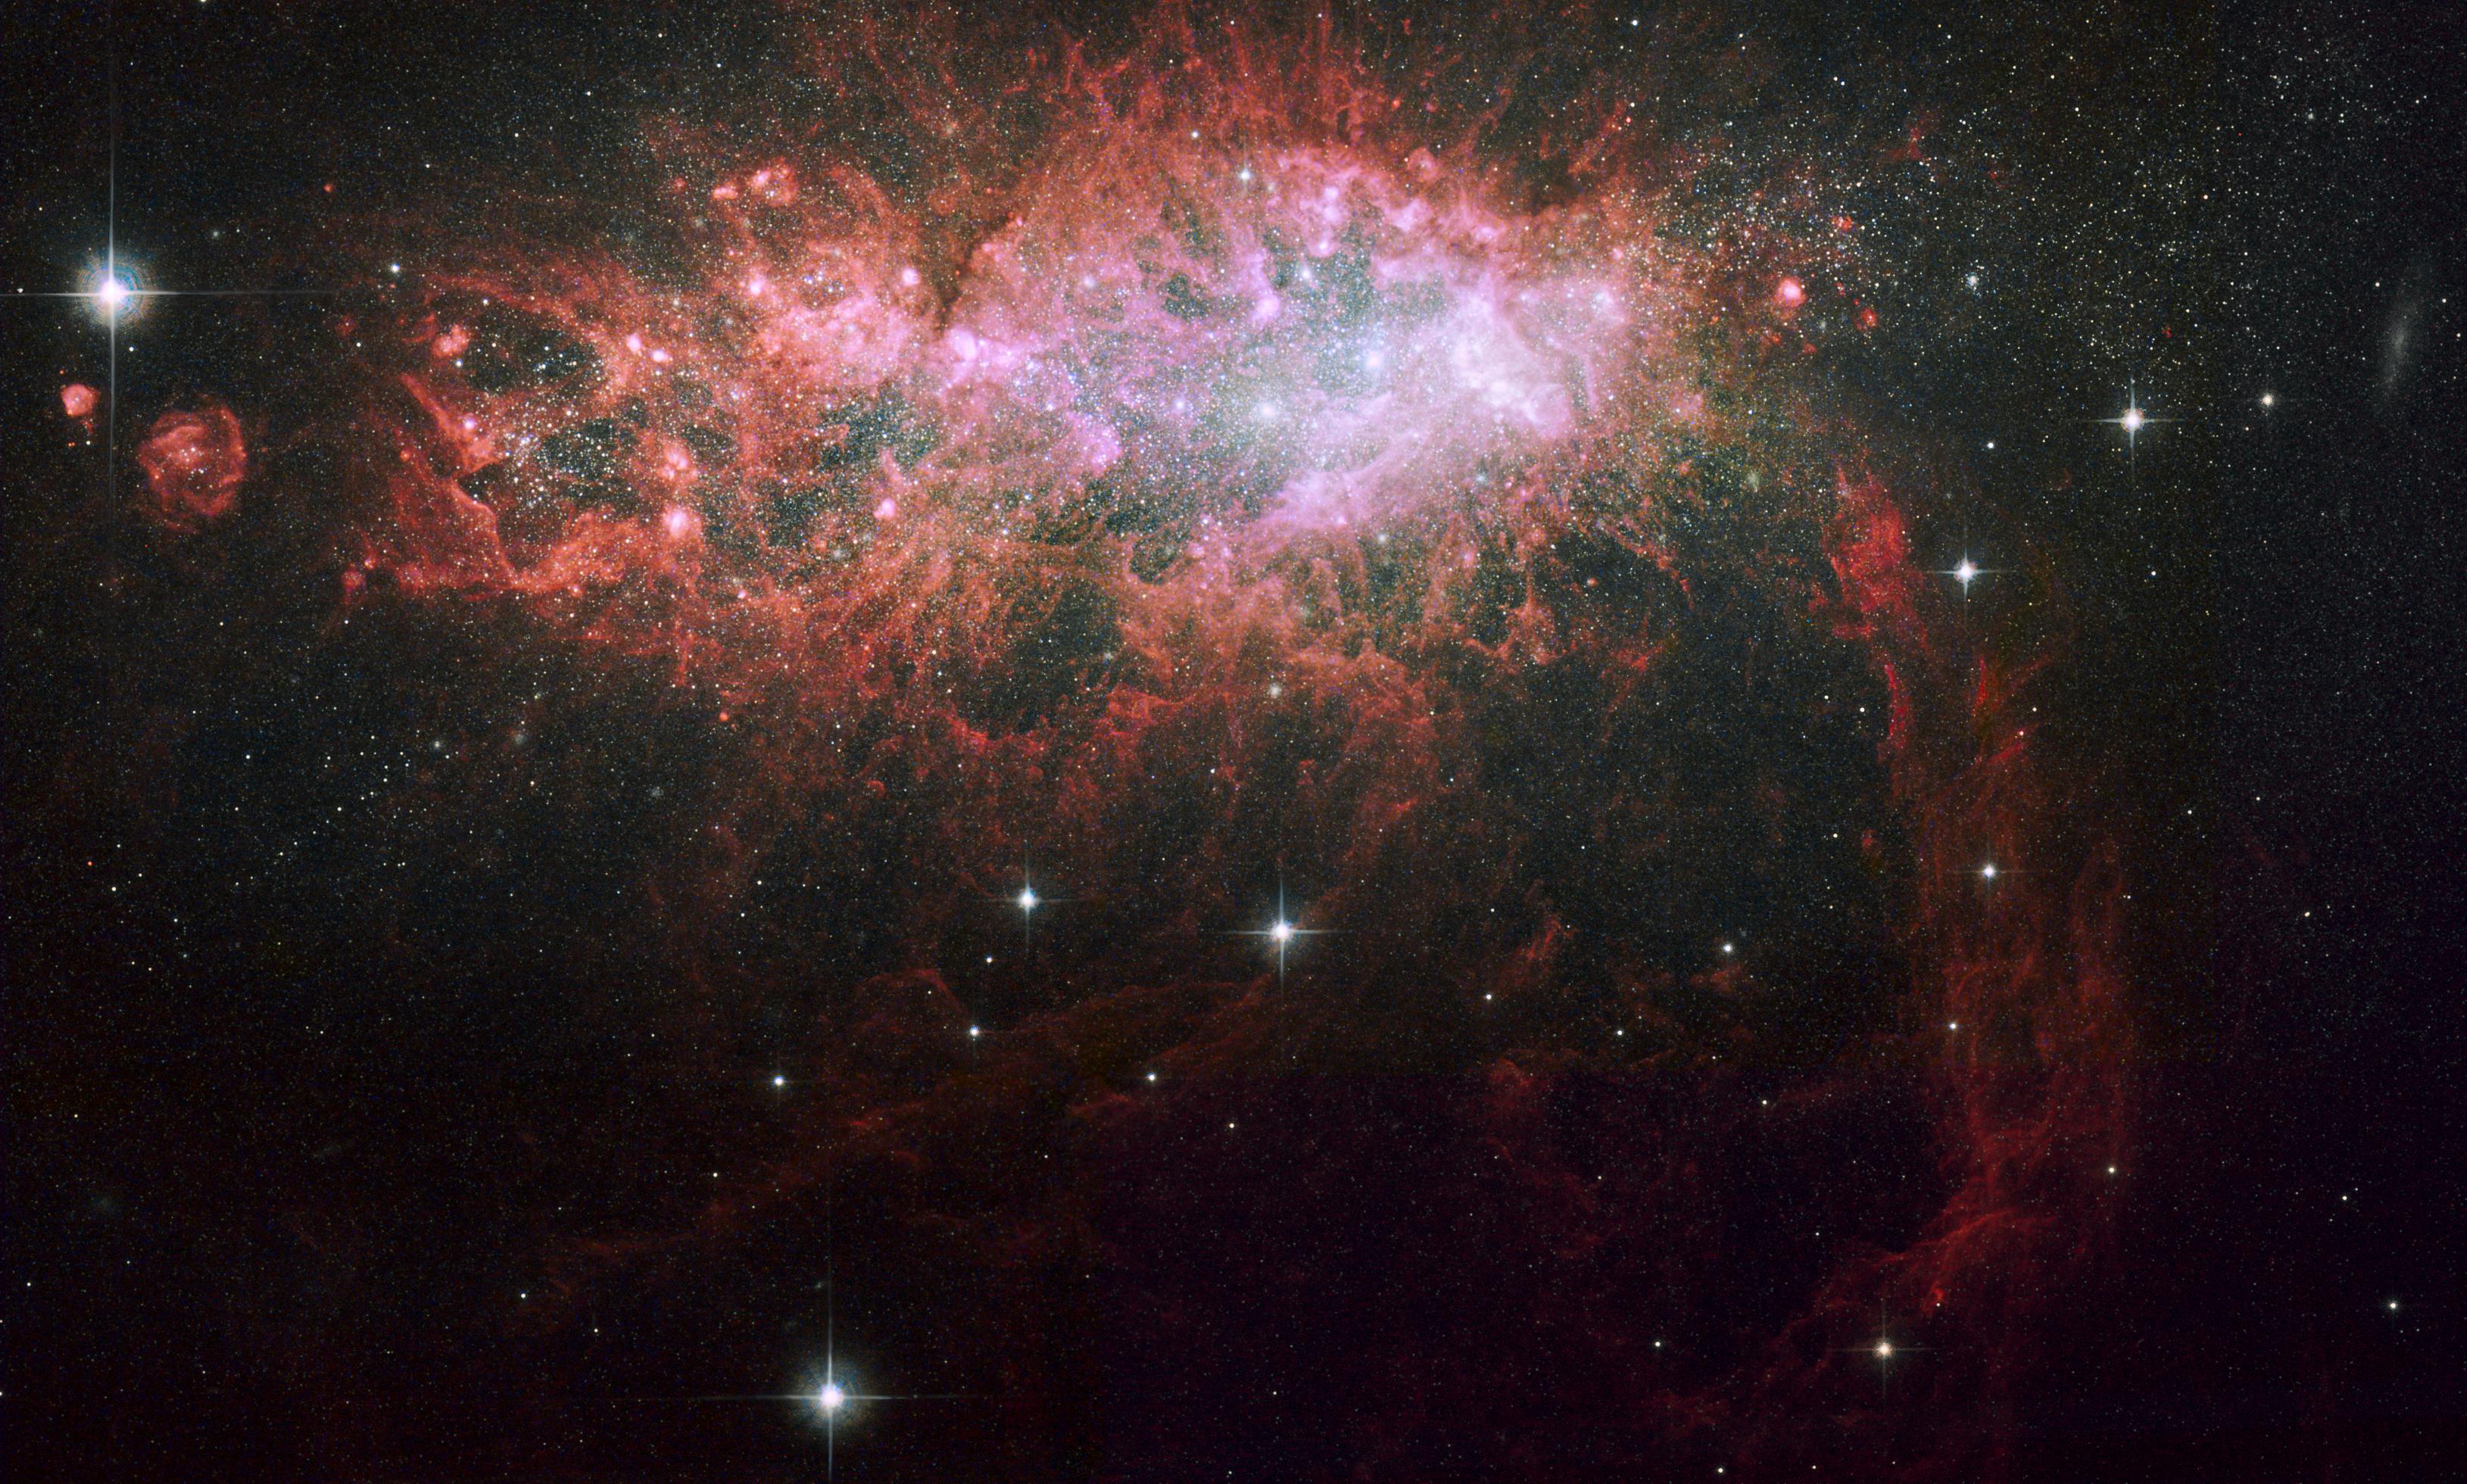 A bright red galaxy shines near the top of the image in shades of pink and white.